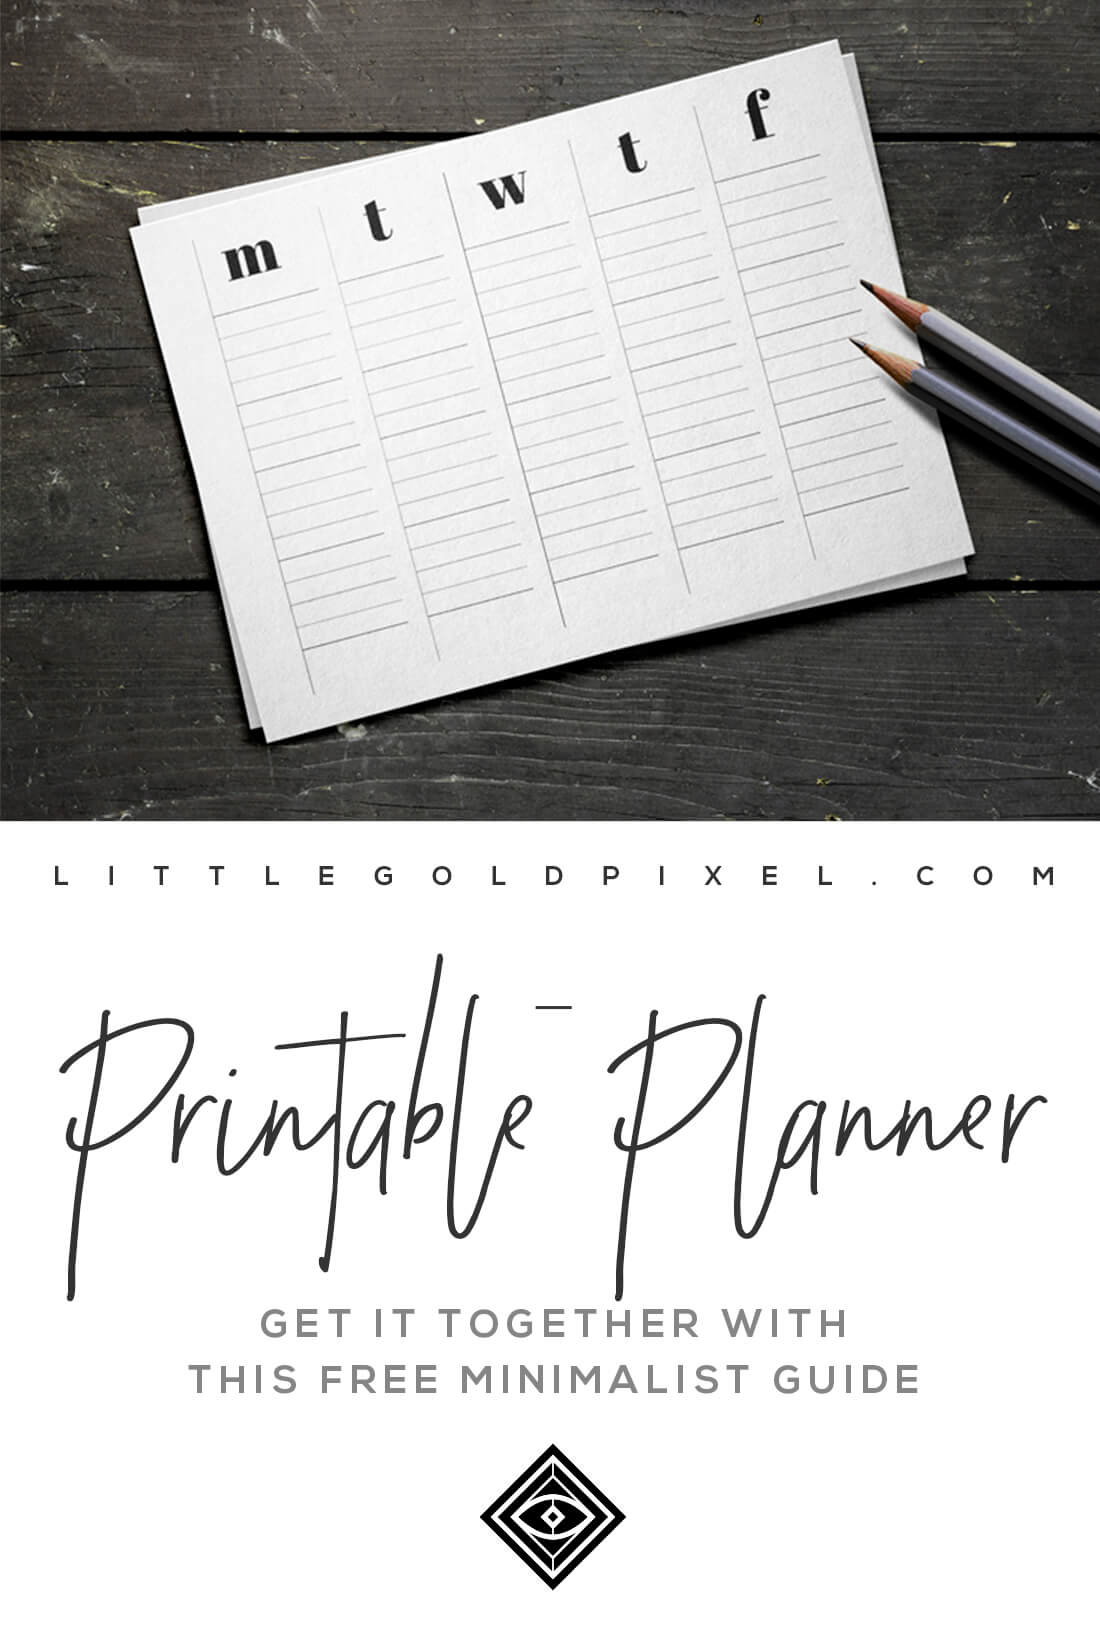 Free Minimalist Planner • Little Gold Pixel • In which I share a free minimalist planner to help you get your ish together (I'm mostly talking to myself here). Download, print and get stuff done today! #minimalist #planner #freeprintable #bulletplanner